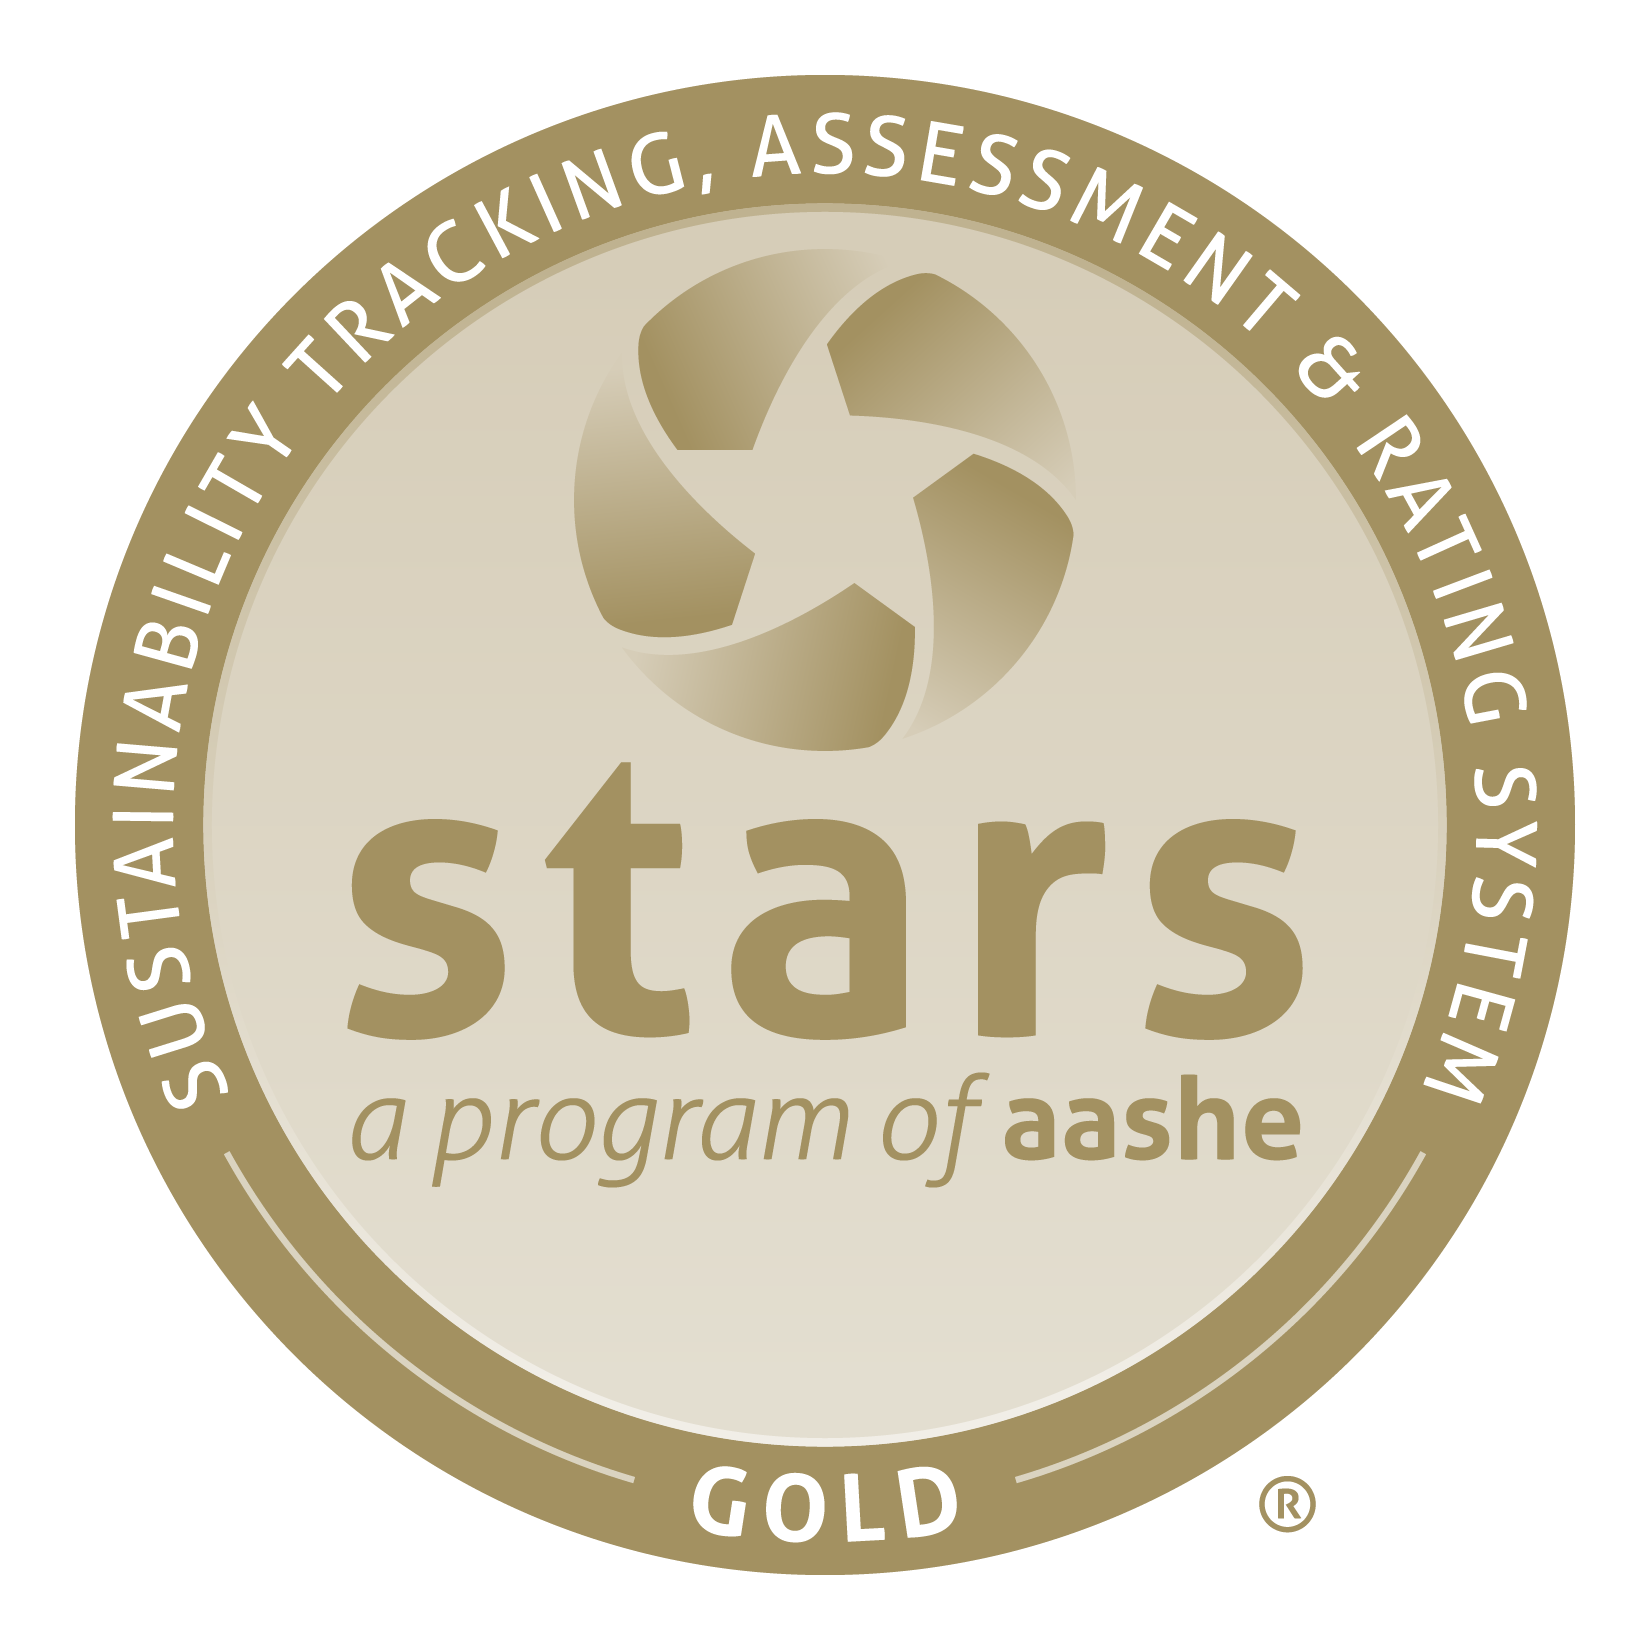 Image of the STARS Gold rating for sustainability from AASHE